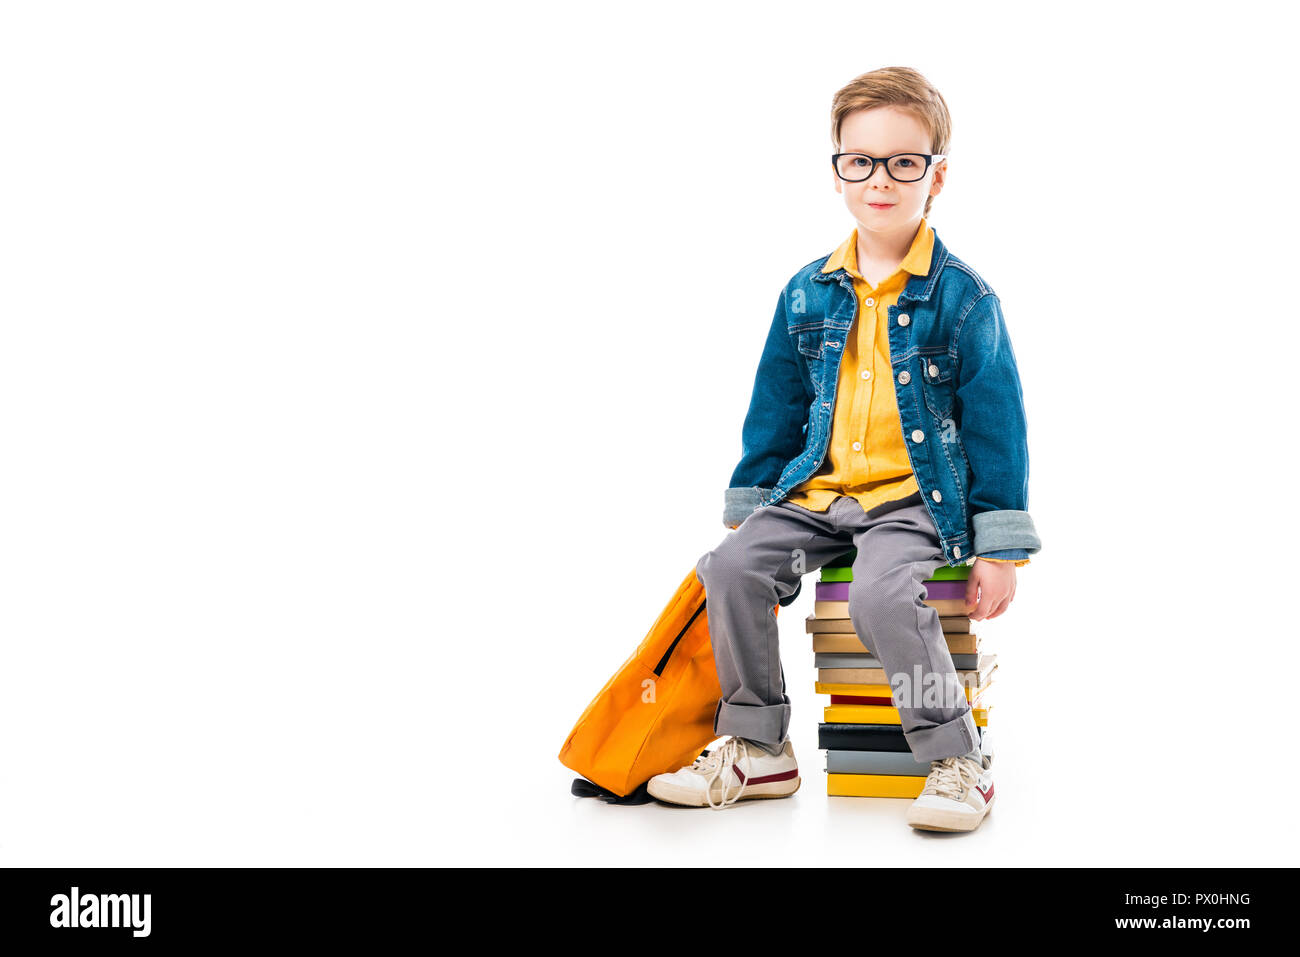 schoolboy sitting on pile of books with backpack, isolated on white Stock Photo